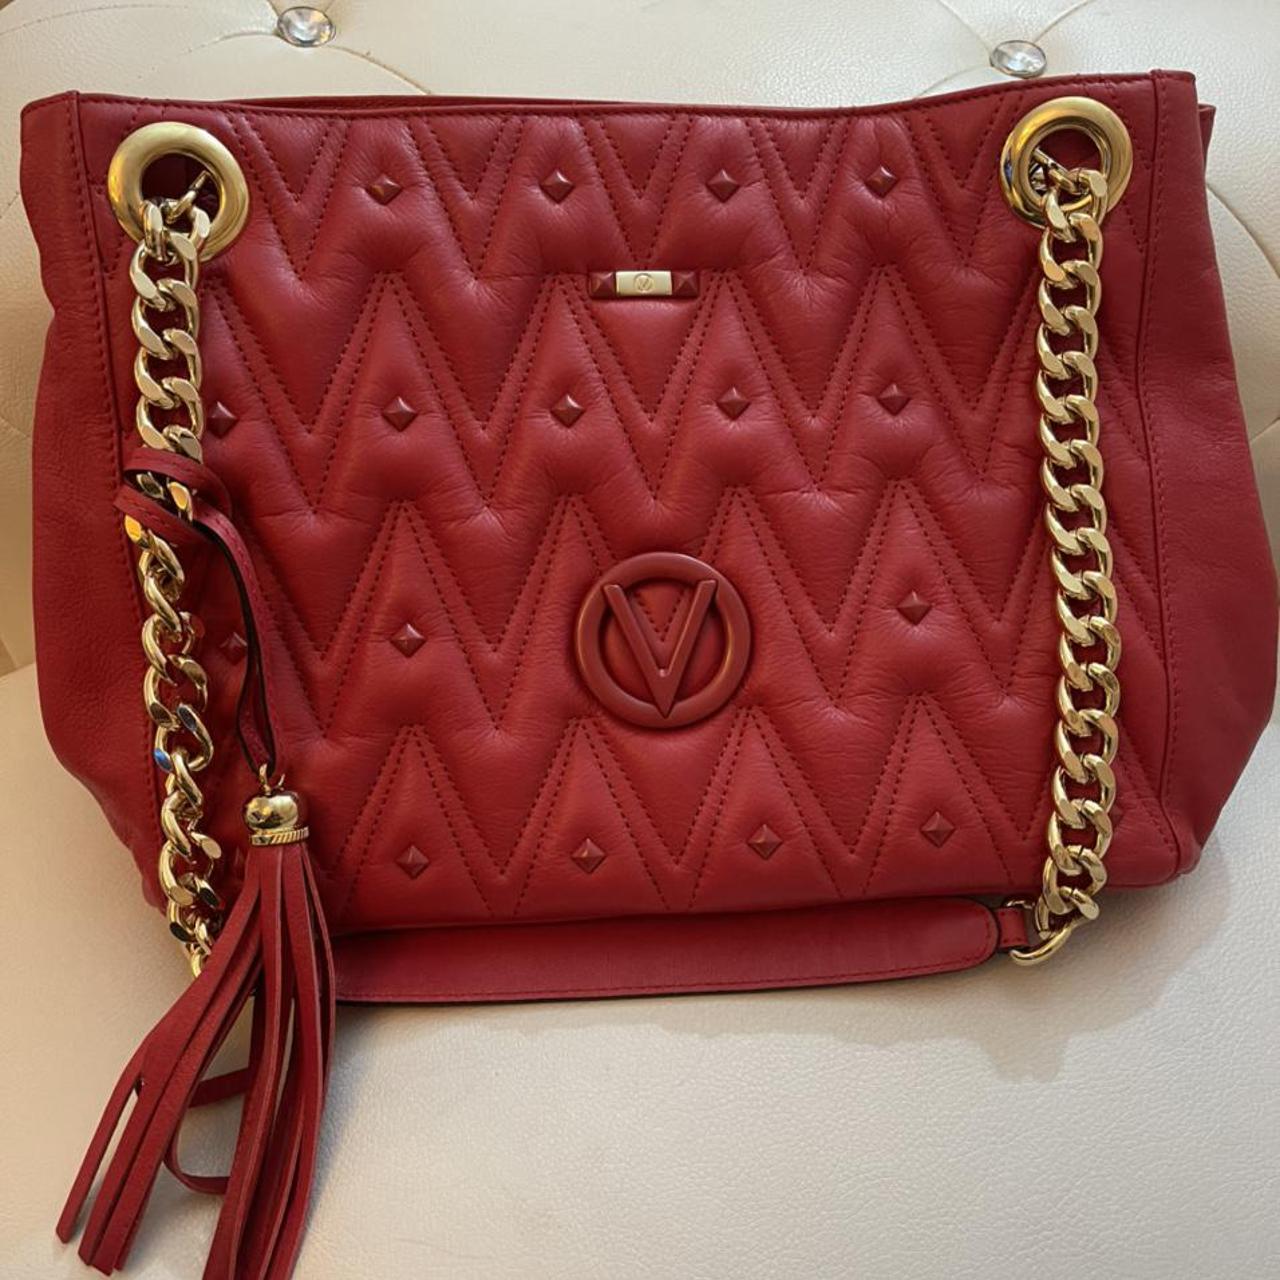 Mario Valentino - Authenticated Handbag - Synthetic Red Plain for Women, Very Good Condition